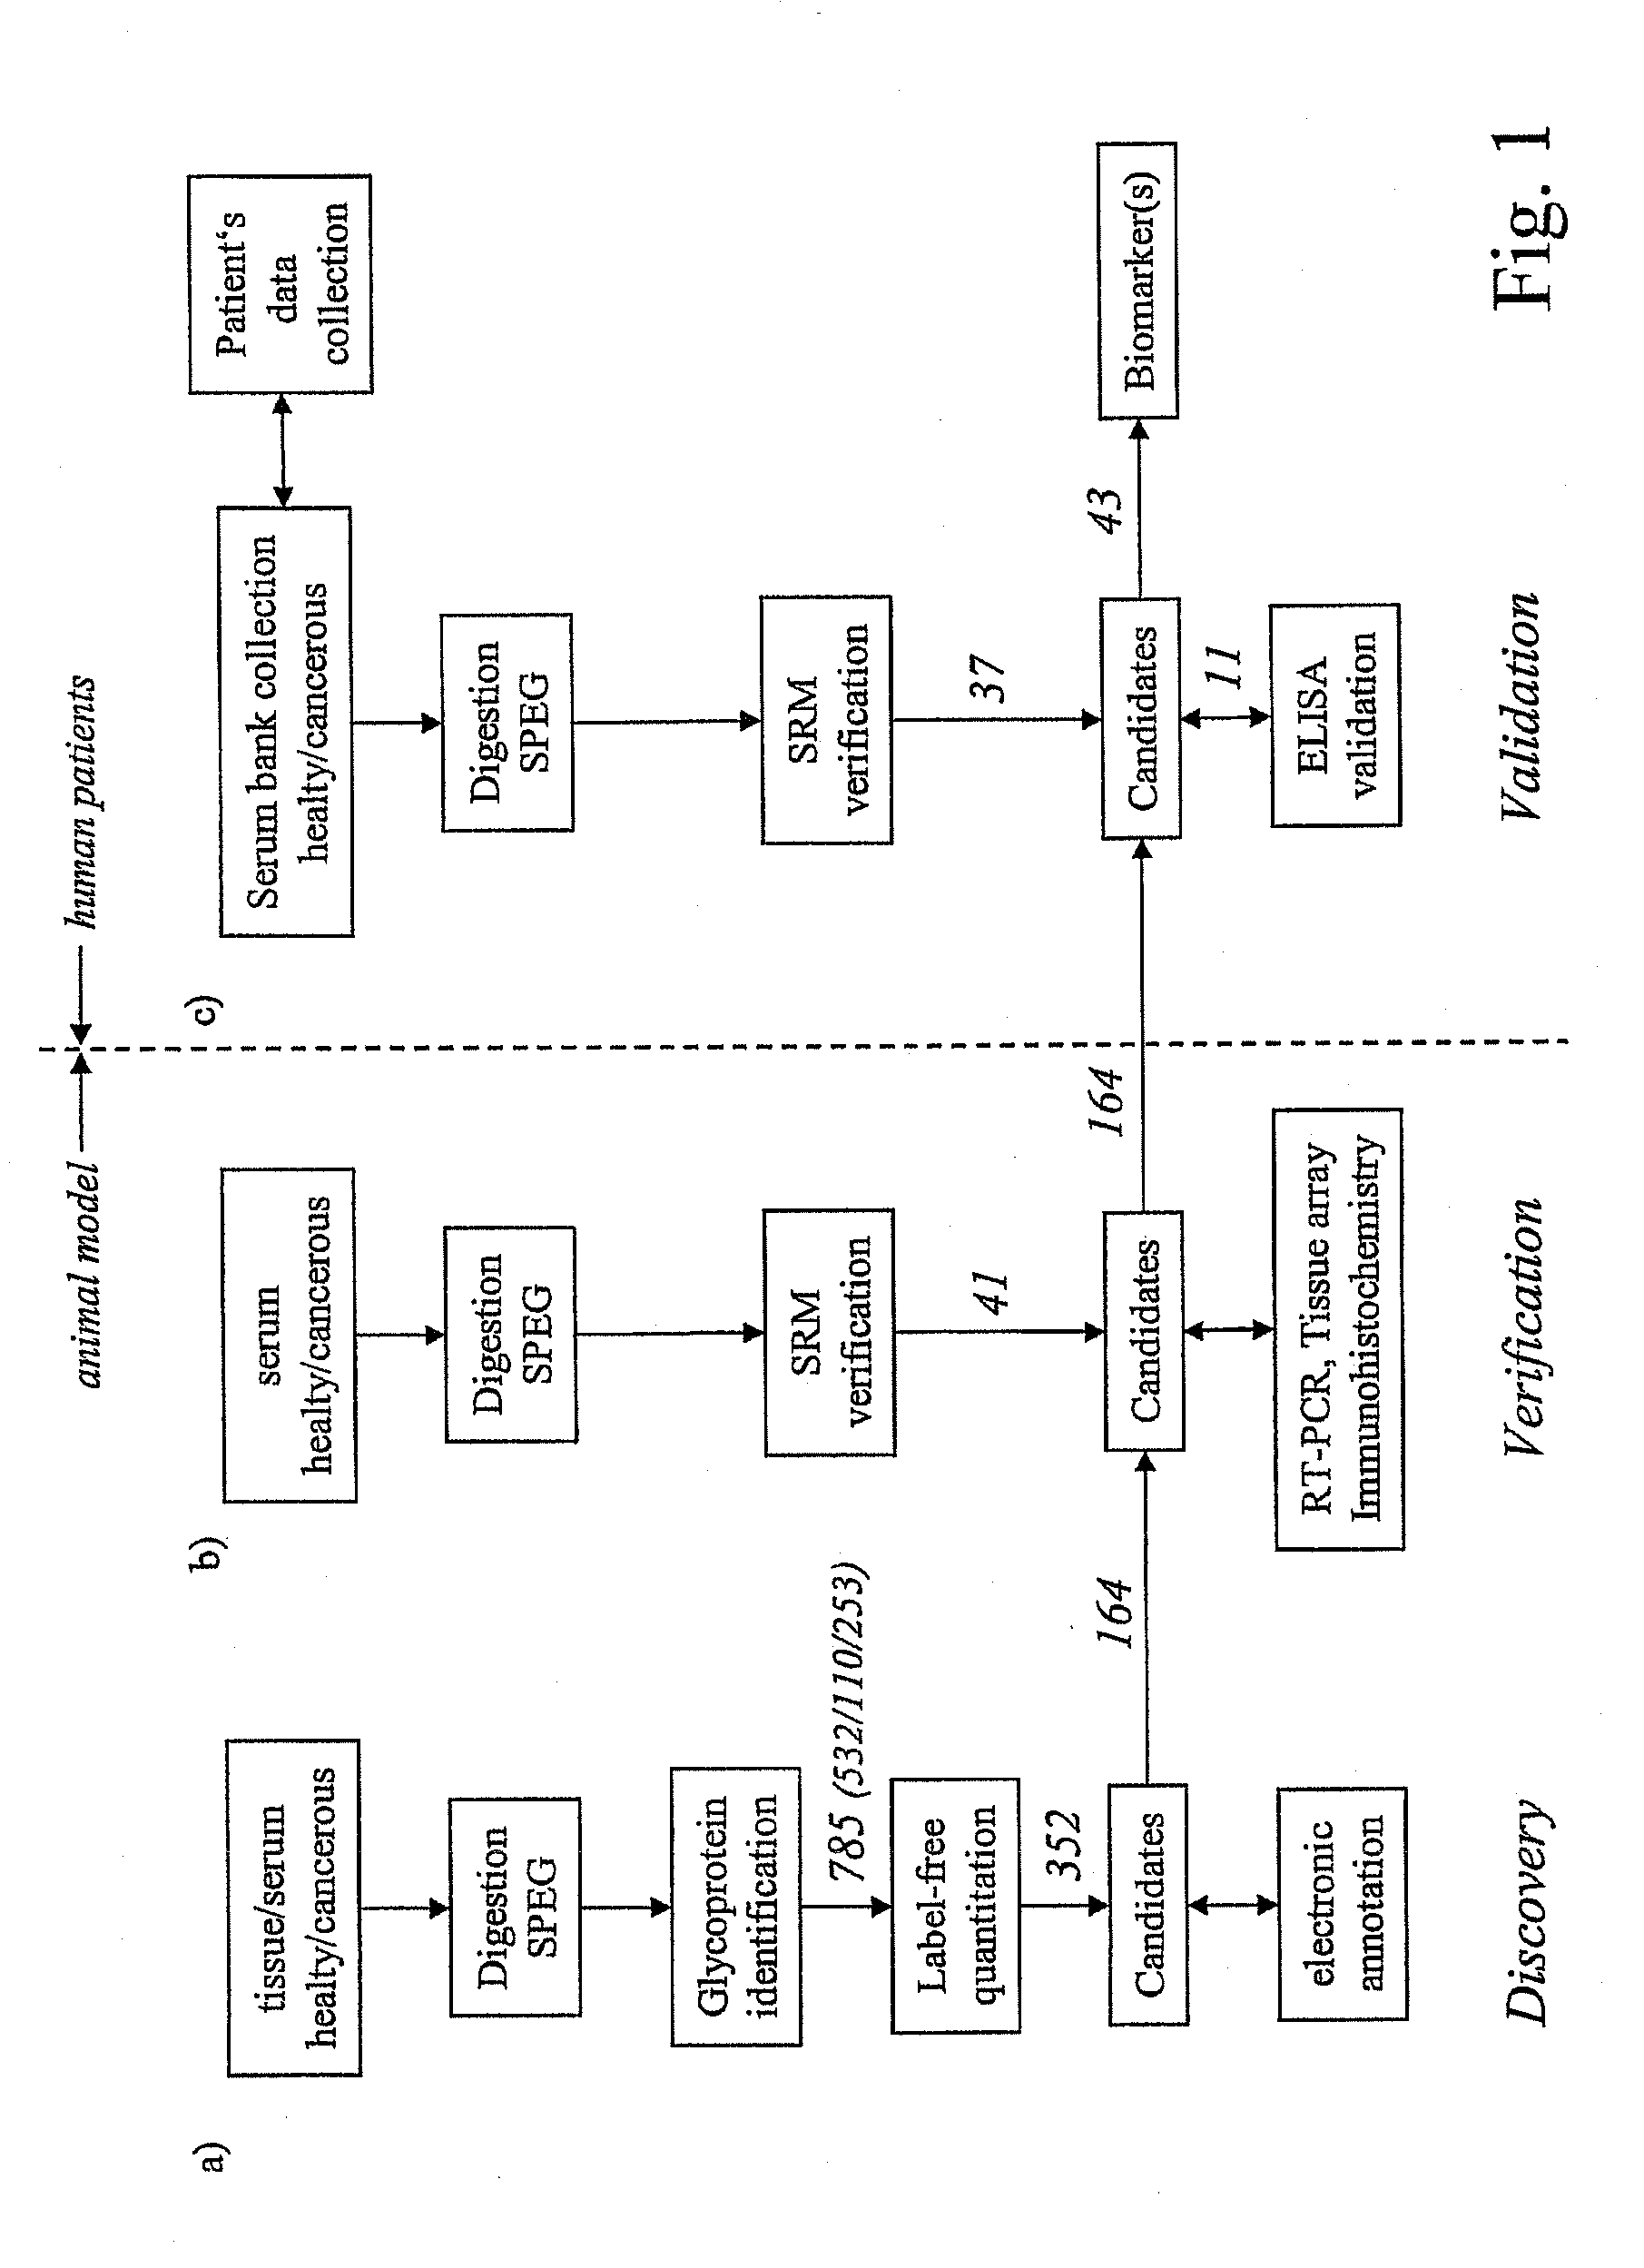 Method for biomarker and drug-target discovery for prostate cancer diagnosis and treatment as well as biomarker assays determined therewith